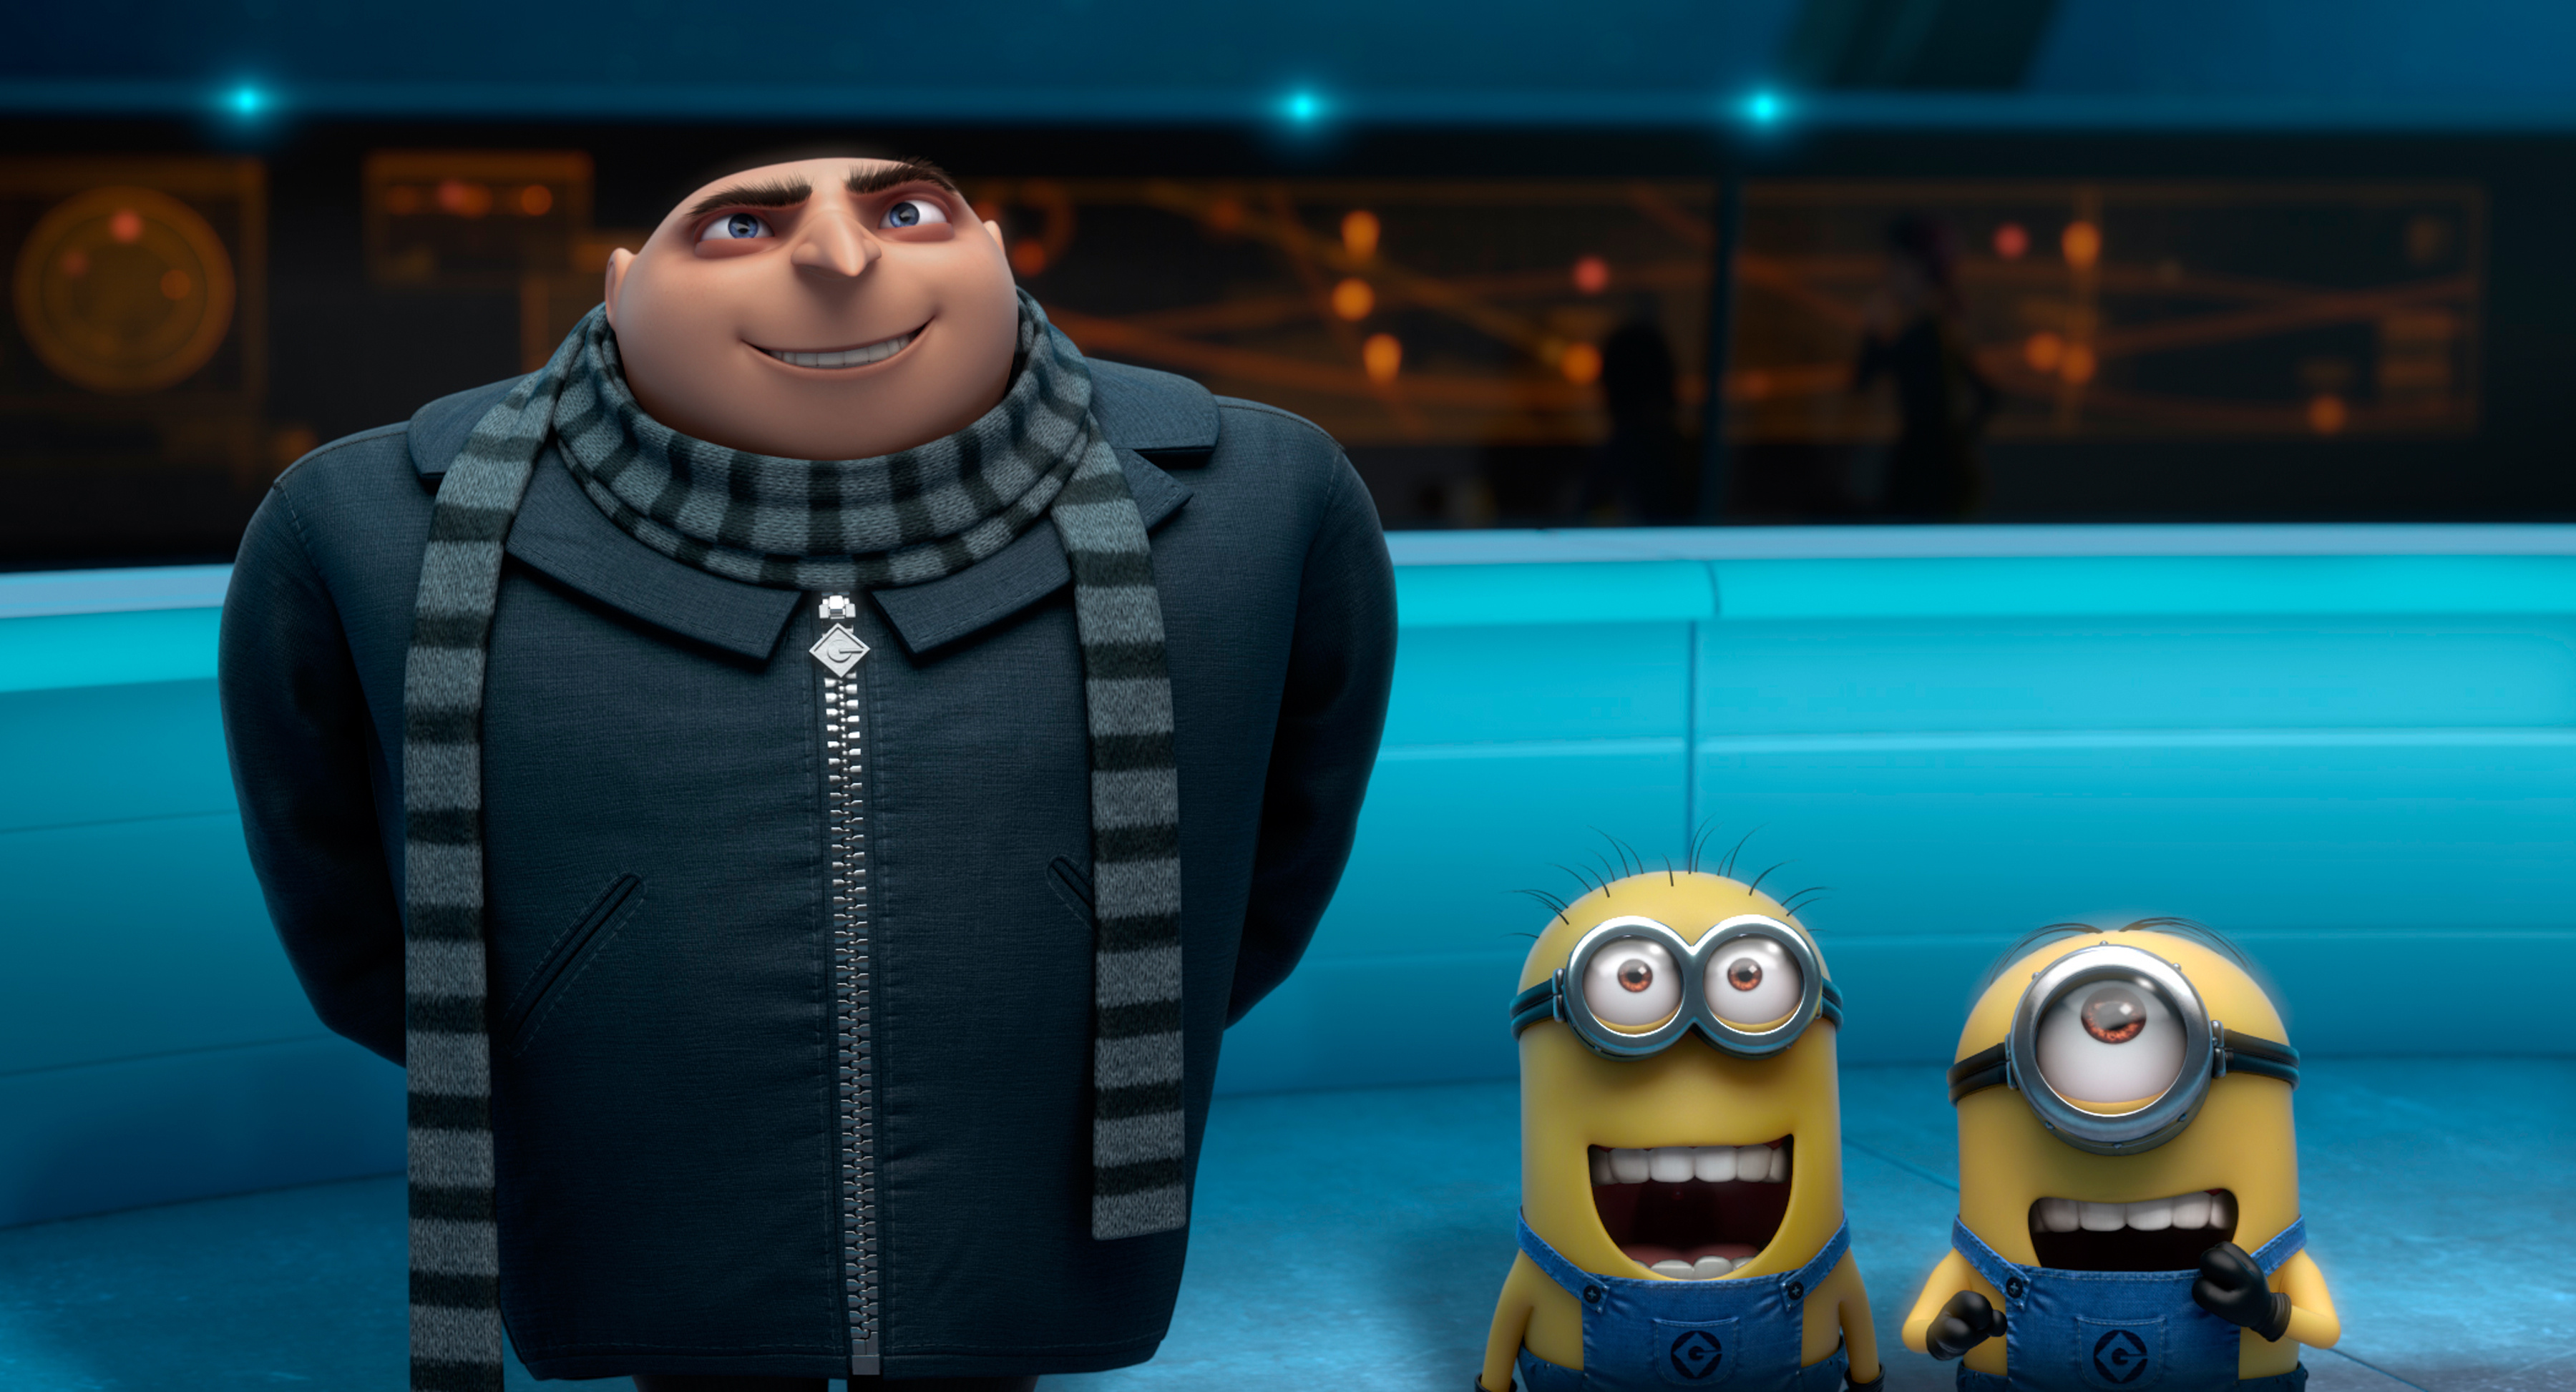 Despicable Me Minions Wallpapers Hd Desktop And Mobile Backgrounds